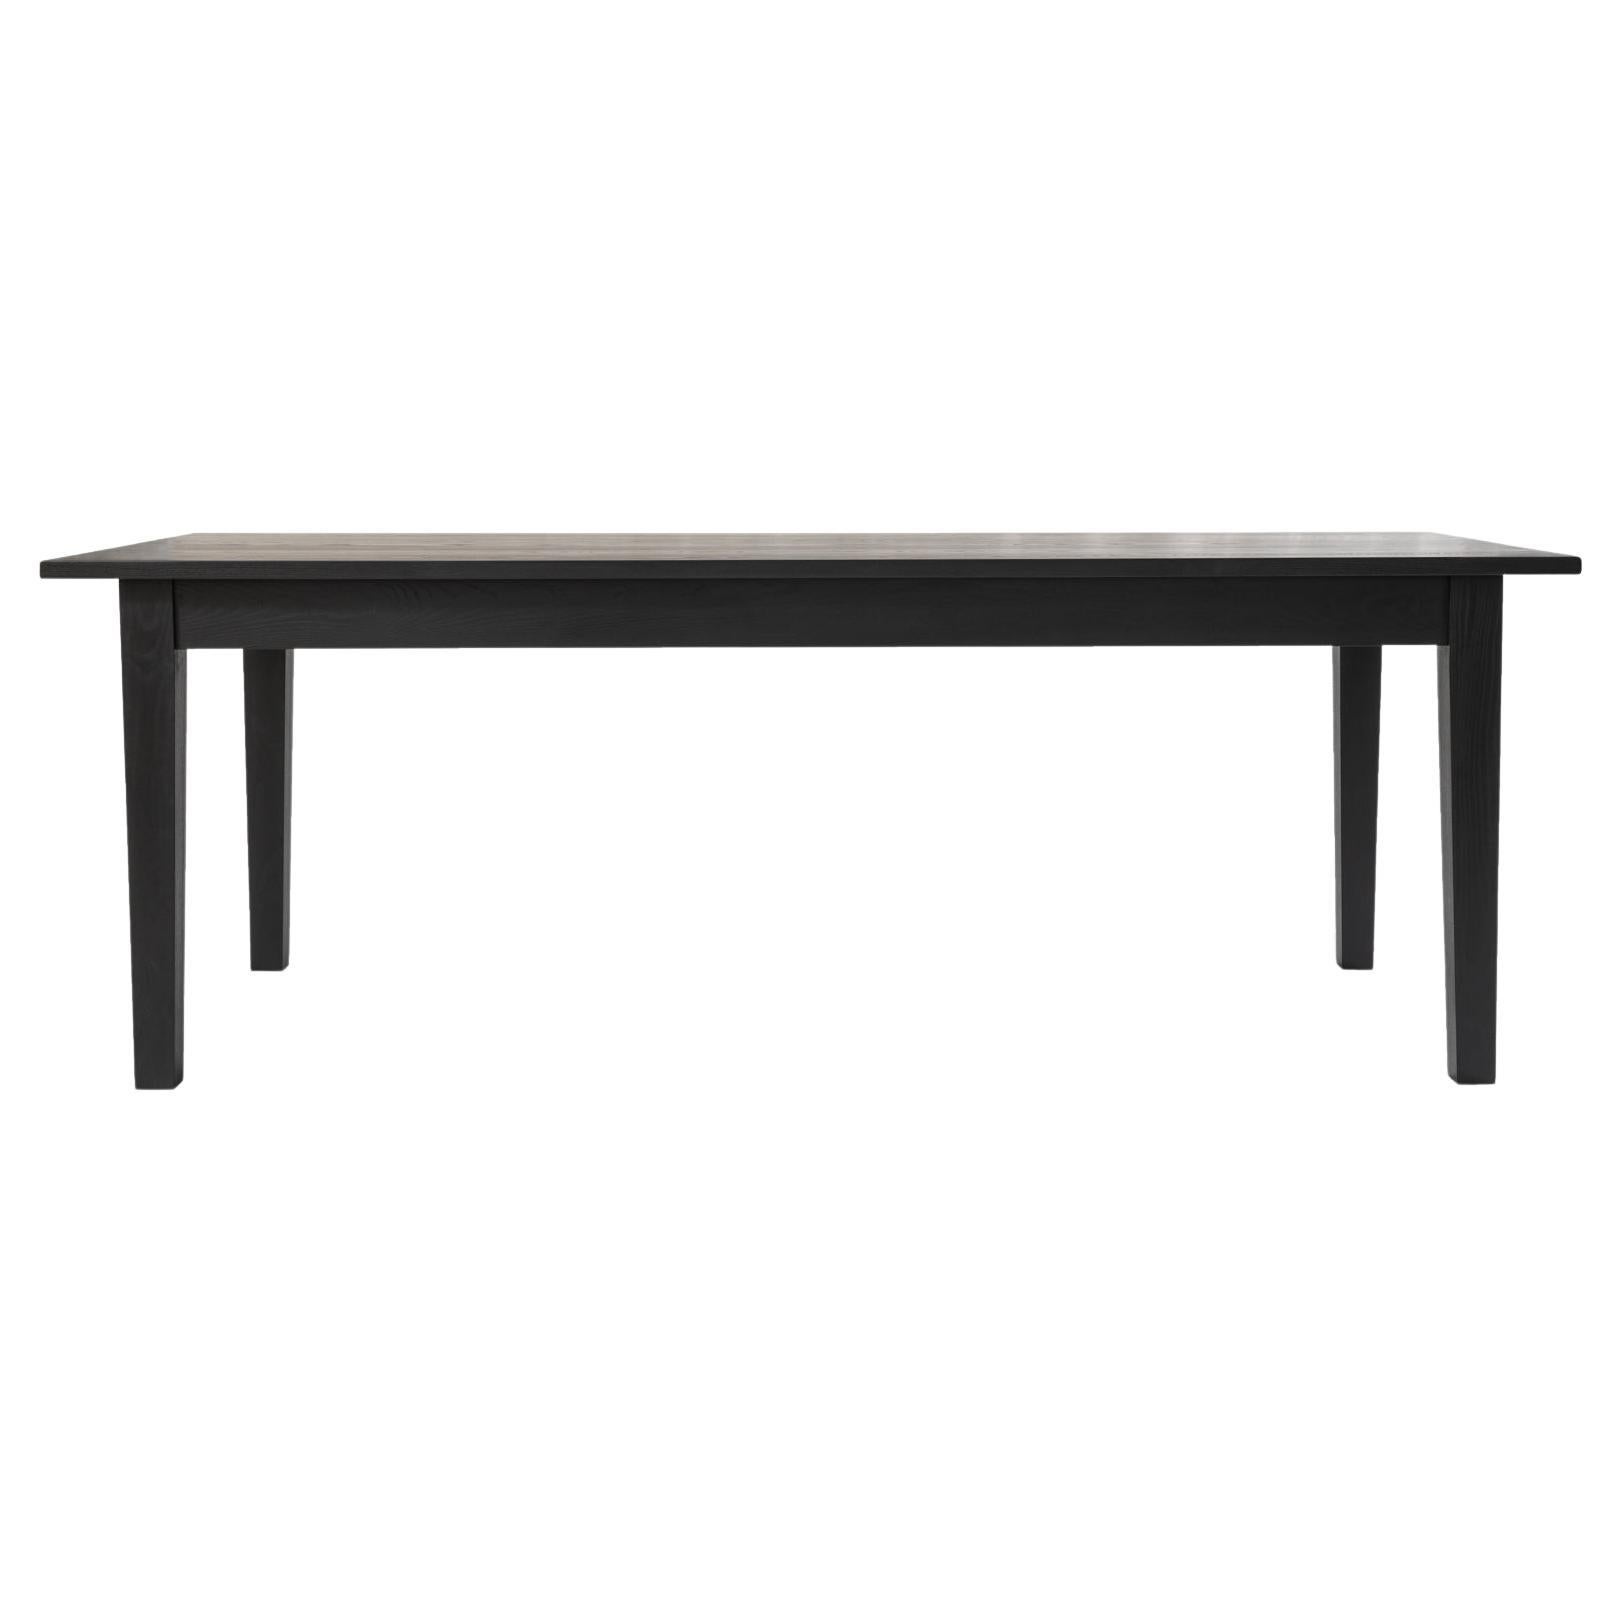 New England Farm Table, Shaker Modern Dining Table in Blackened Ash